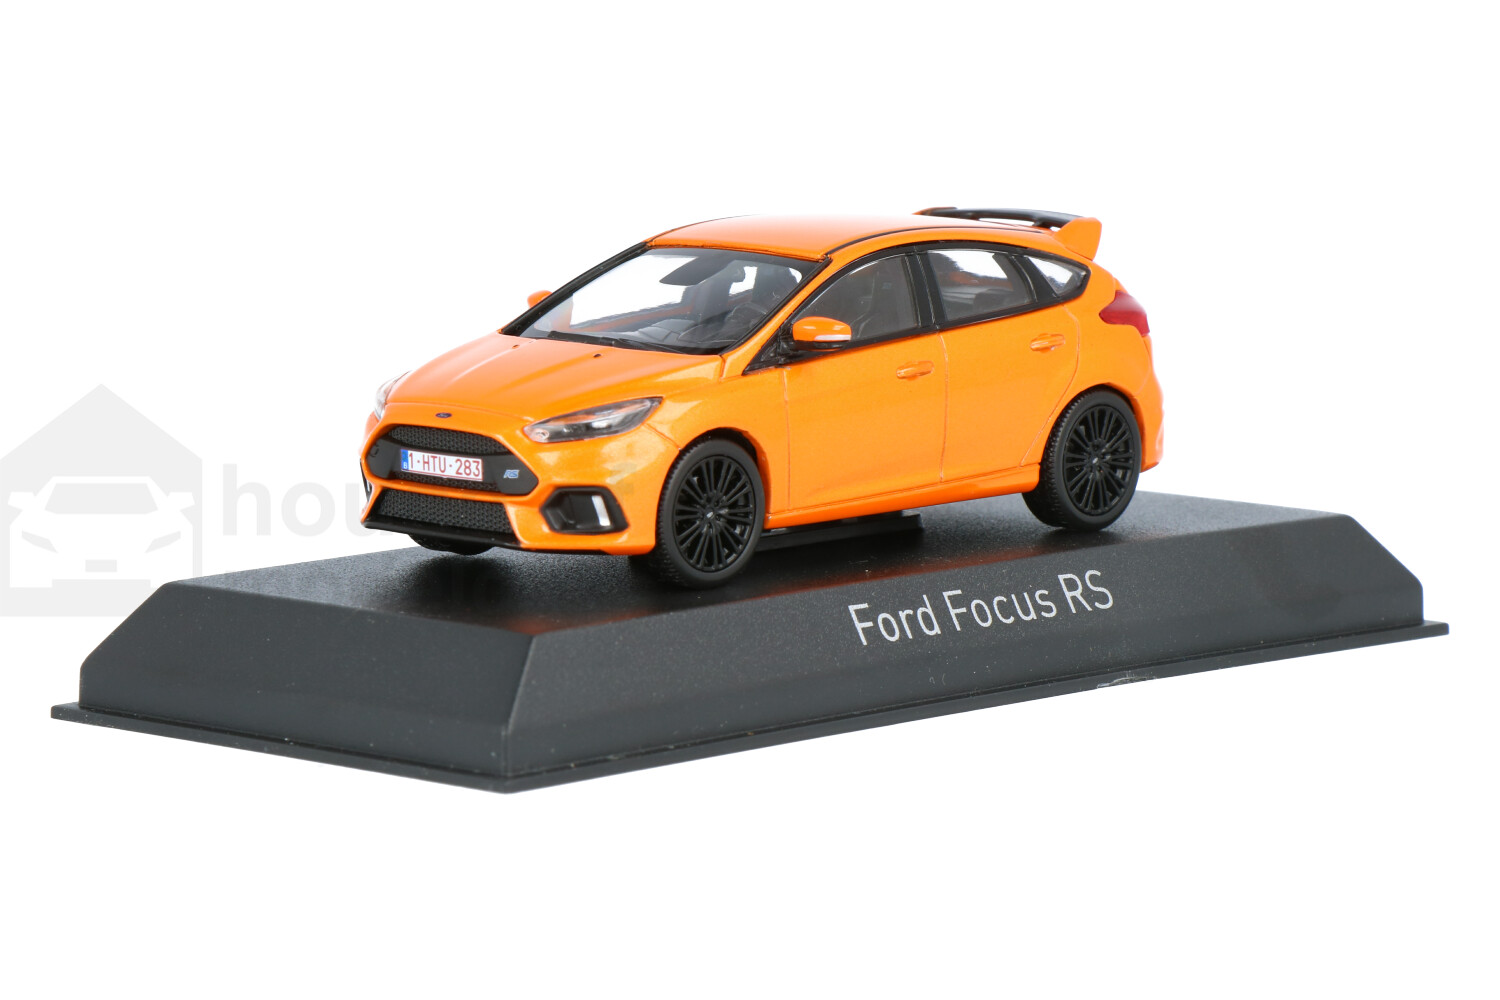 Ford-Focus-RS-270566_13153551092705665-NorevFord-Focus-RS-270566_Houseofmodelcars_.jpg